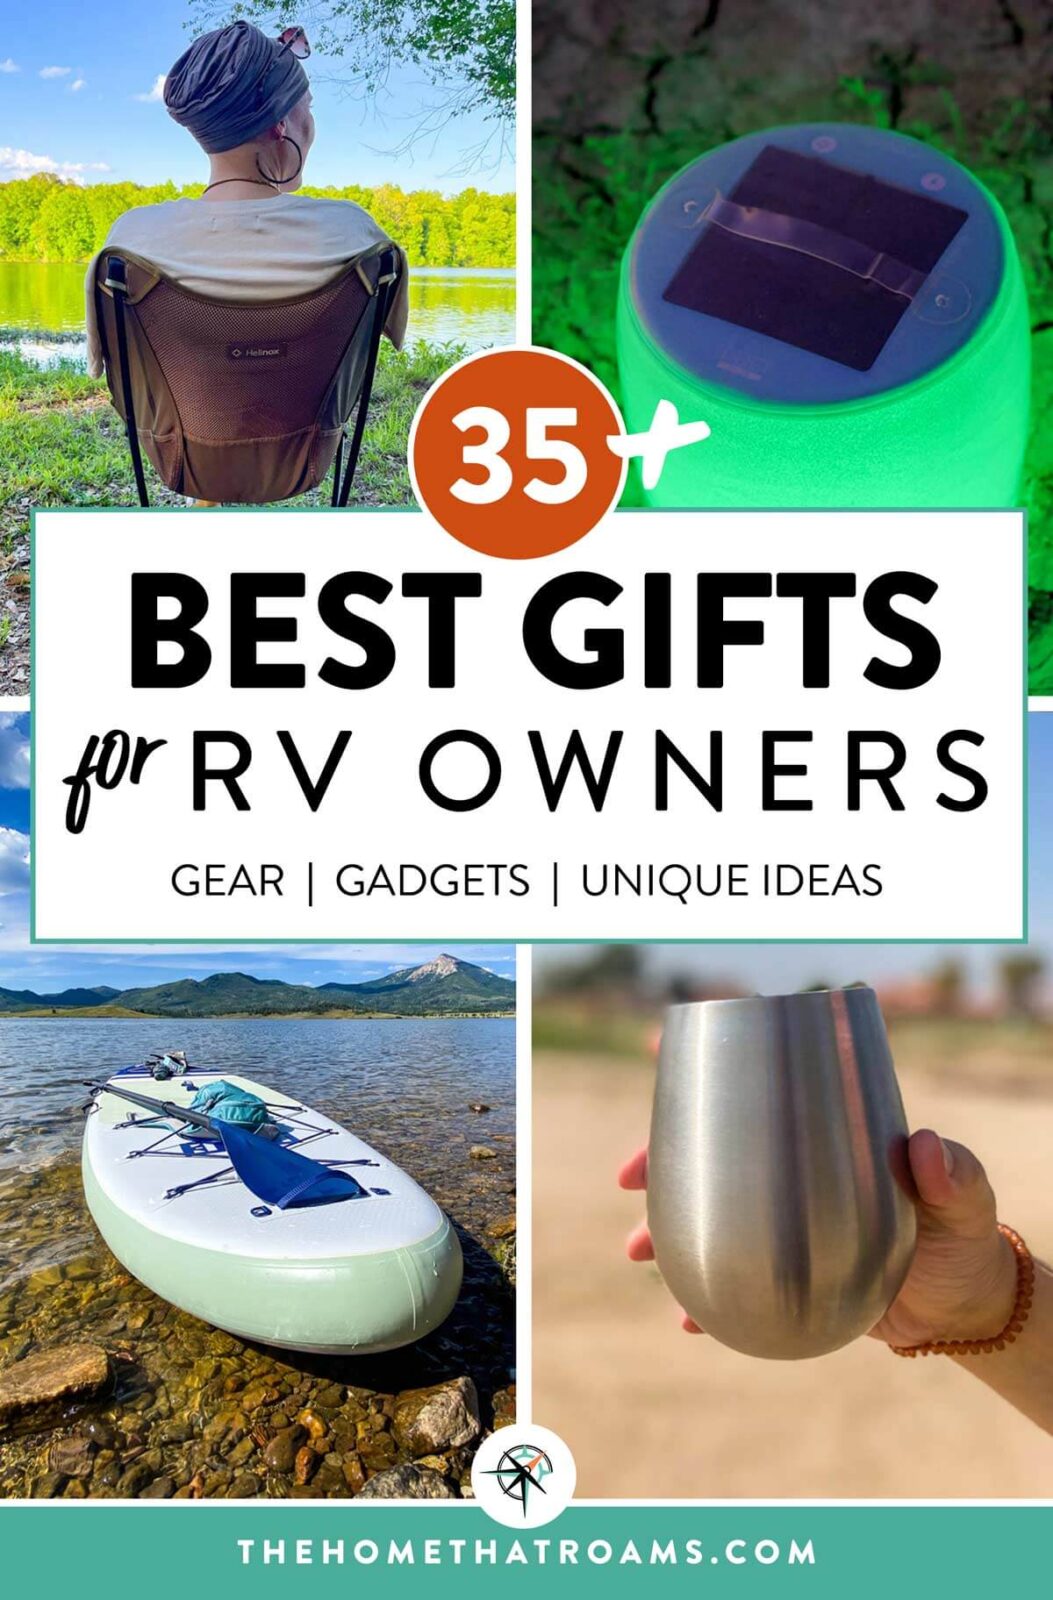 Pinterest image of gift ideas for RVers including a small camping chair, solar lantern, inflatable paddleboard, and stainless steel wine glass.